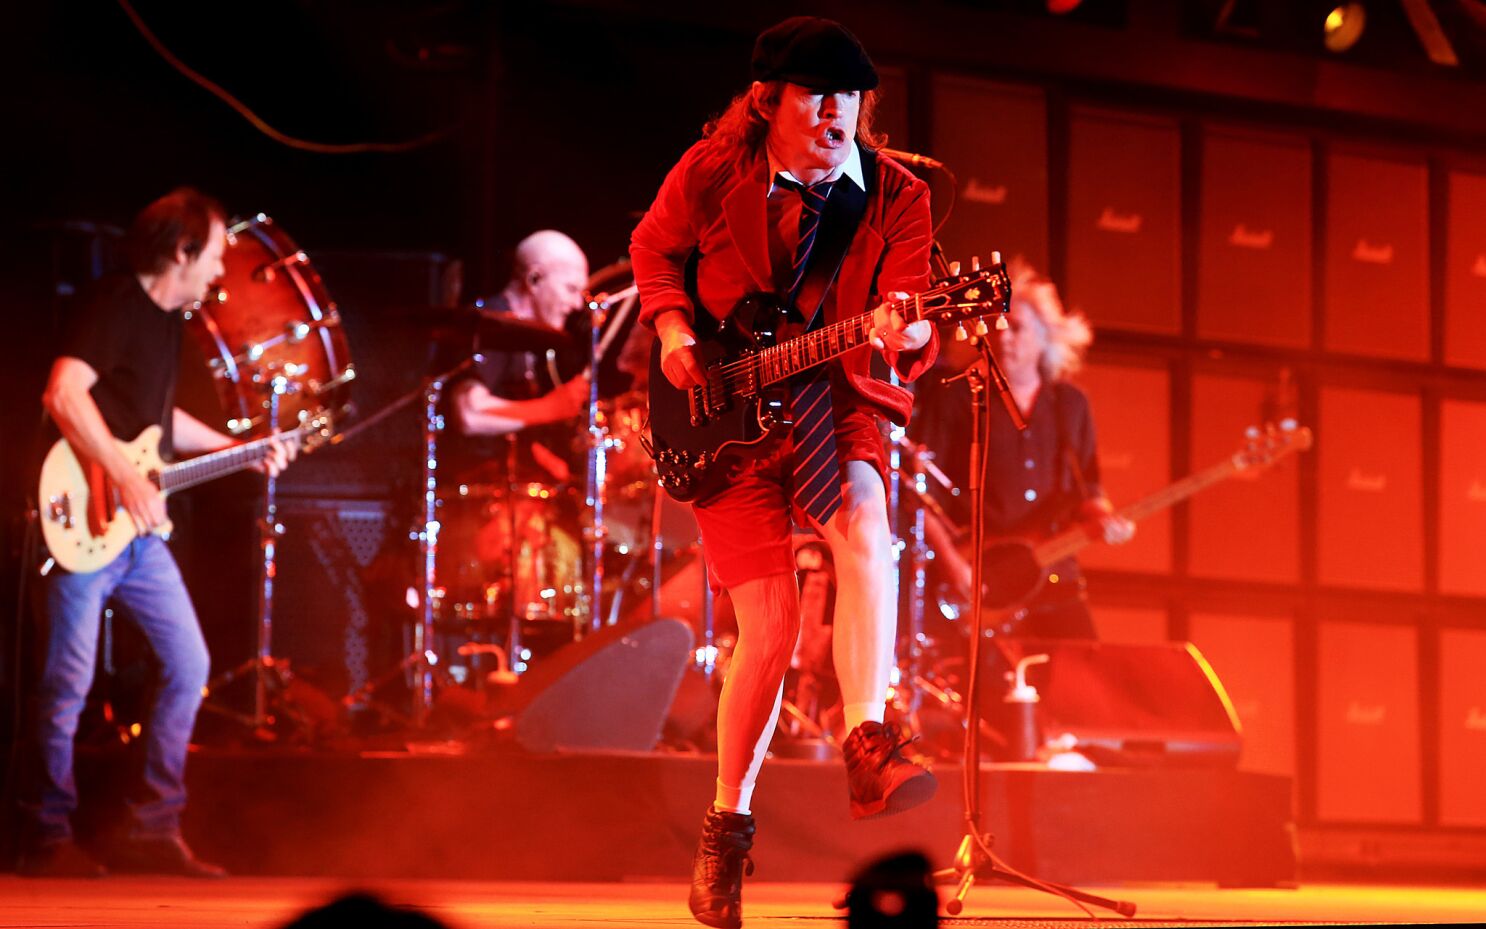 Review: Coachella AC/DC delivers dirty deeds in set - Los Angeles